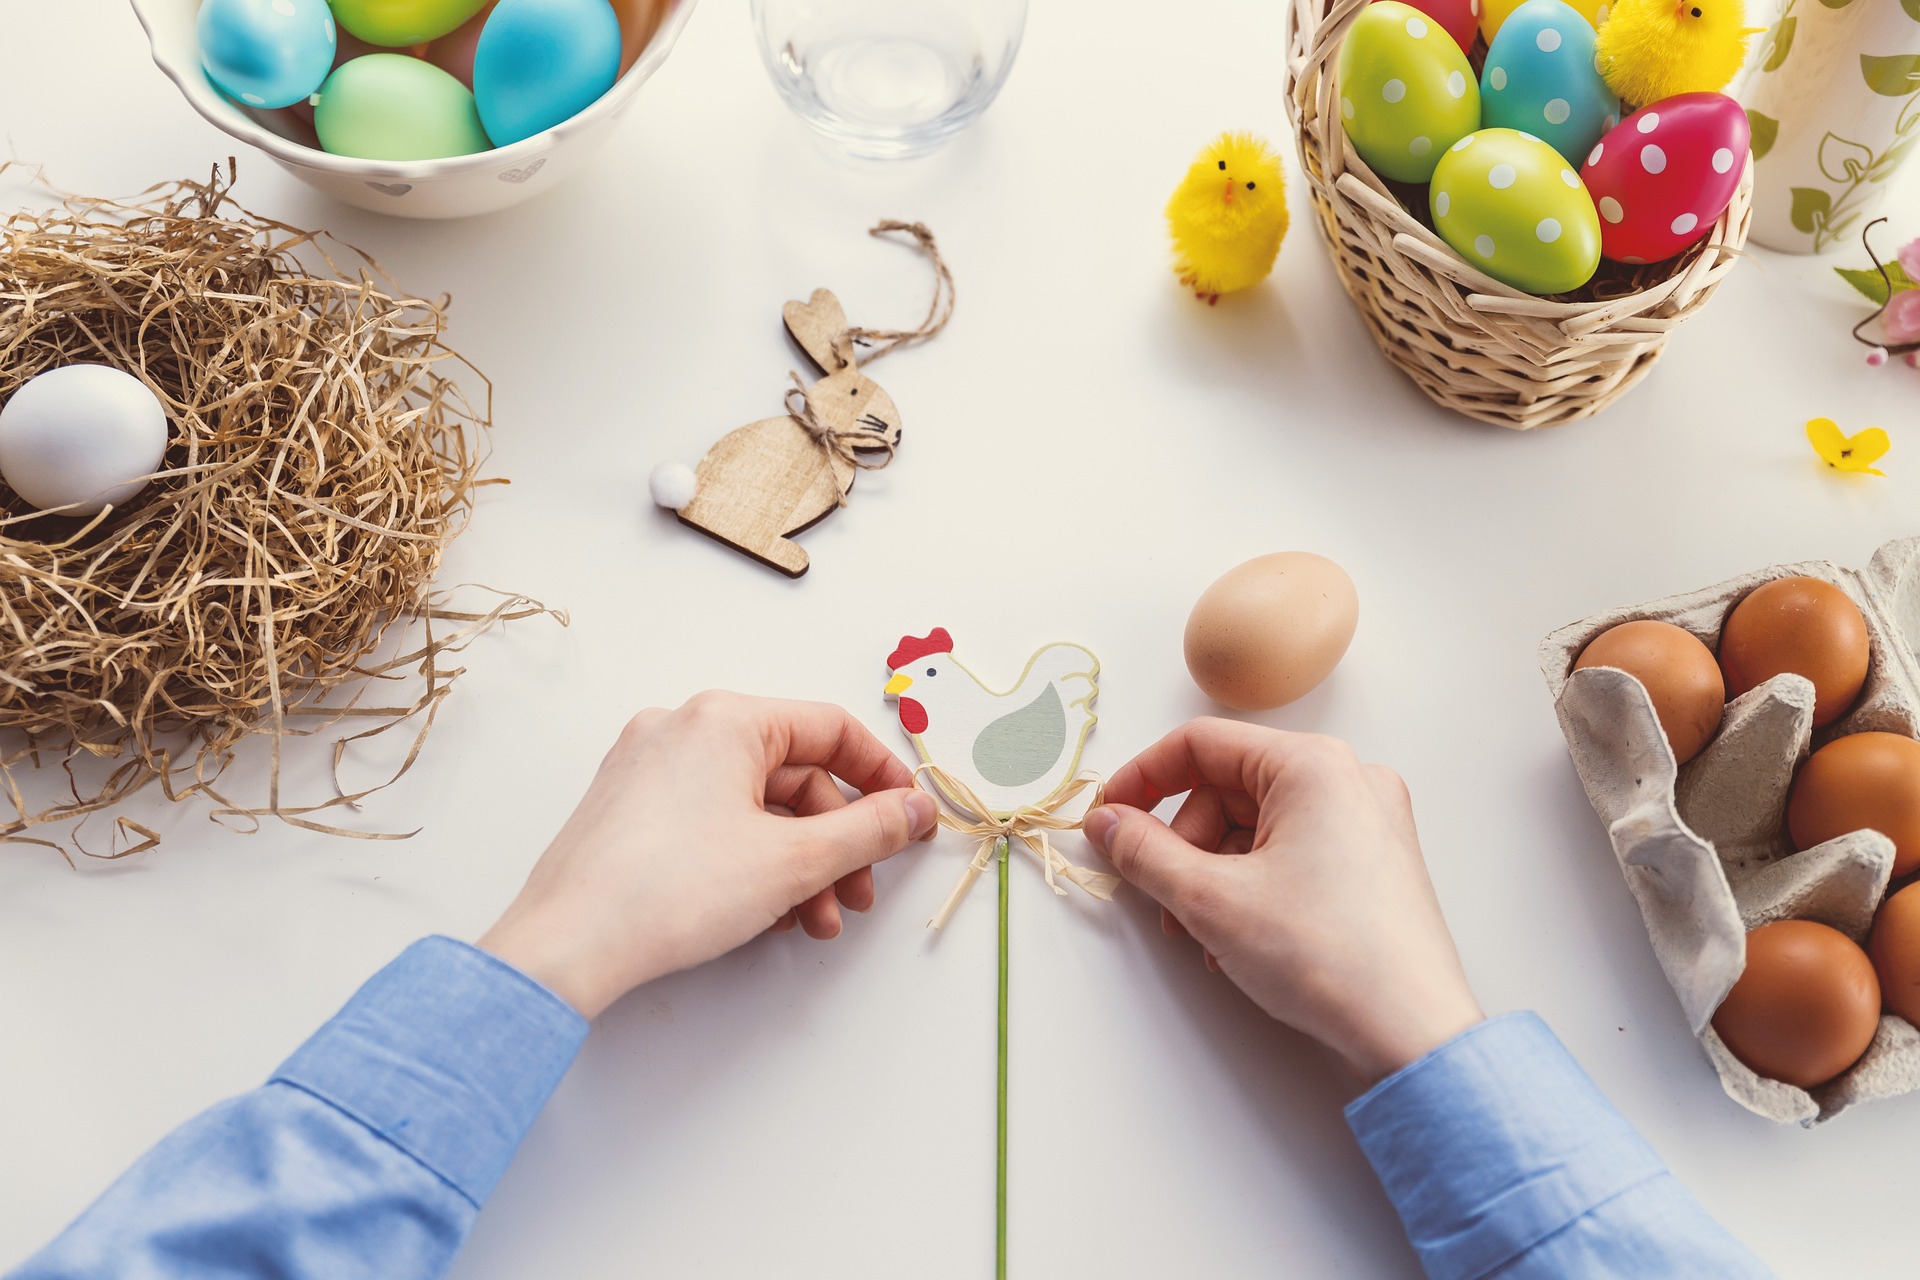 Course Image for 8040C2242 Family Fun:: Easter Crafts (Workshop)